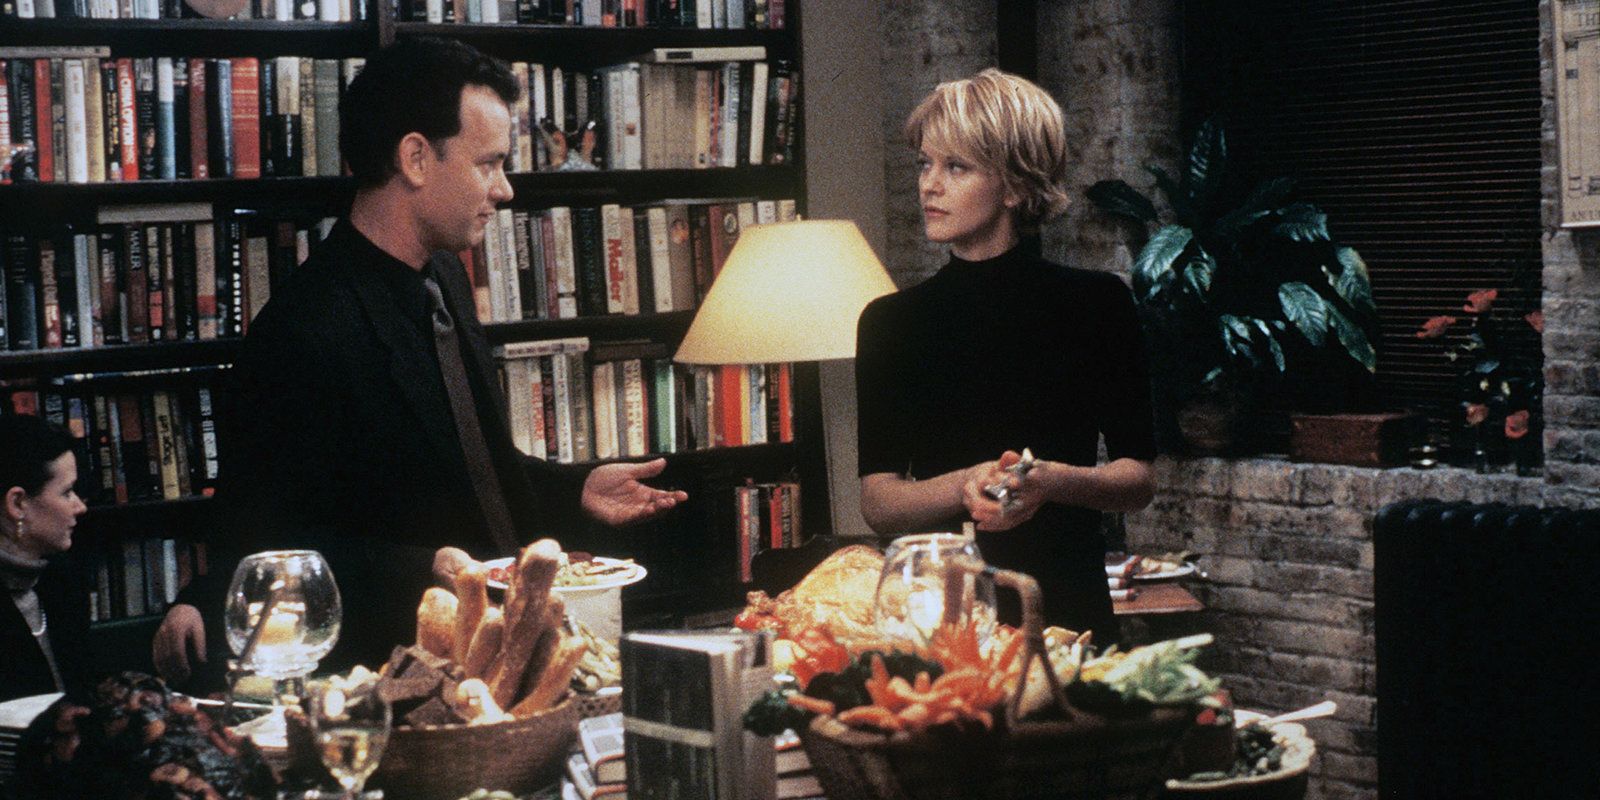 Joe and Kathleen in You've Got Mail.